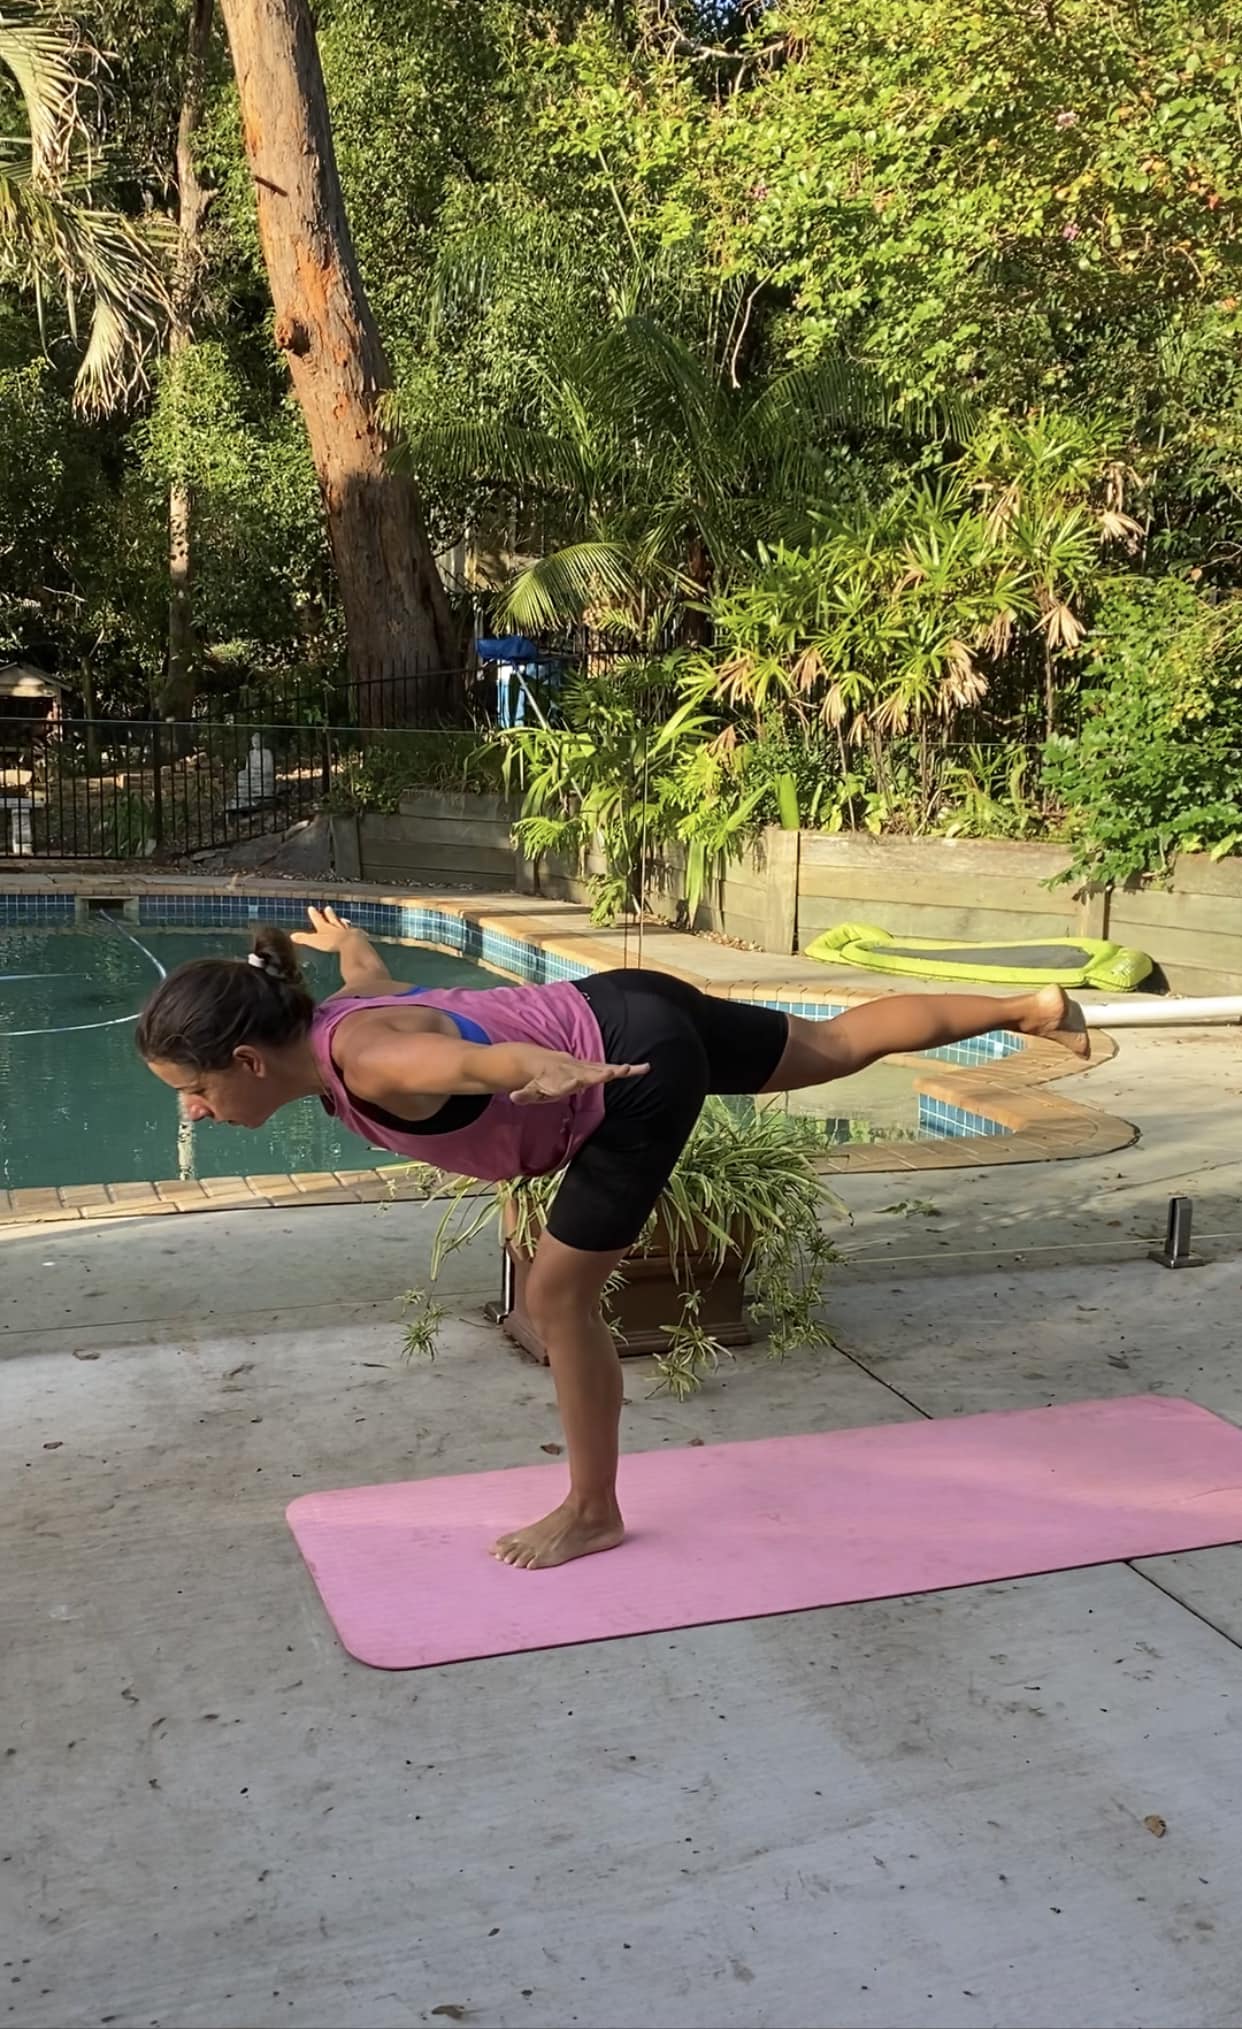 Yoga helped Angelica build strength during chemo